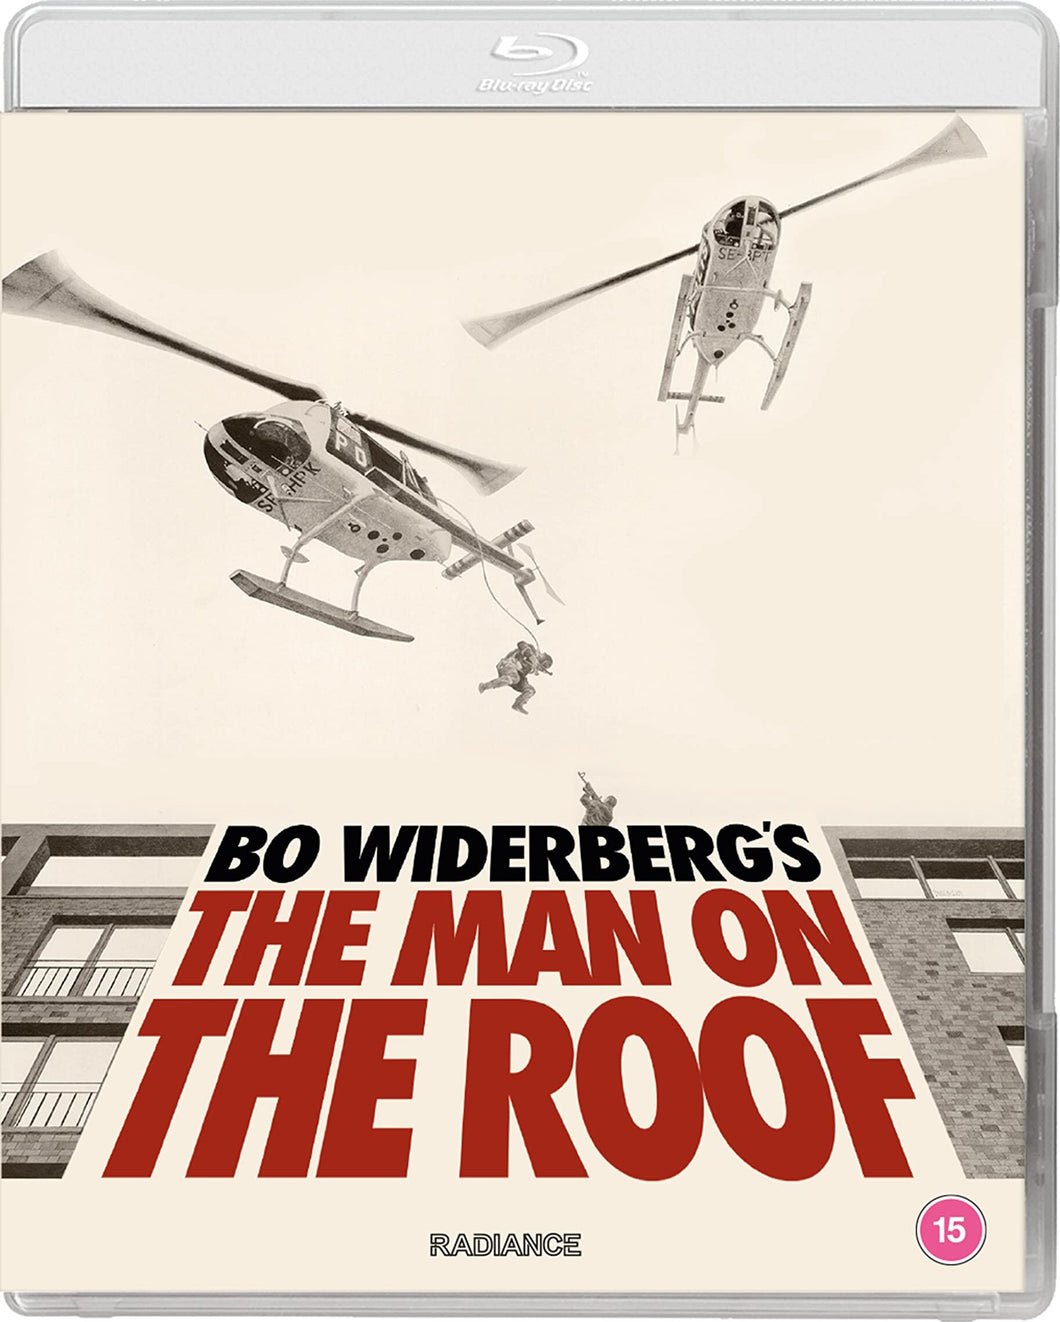 The Man on the Roof (1976) de Bo Widerberg - front cover